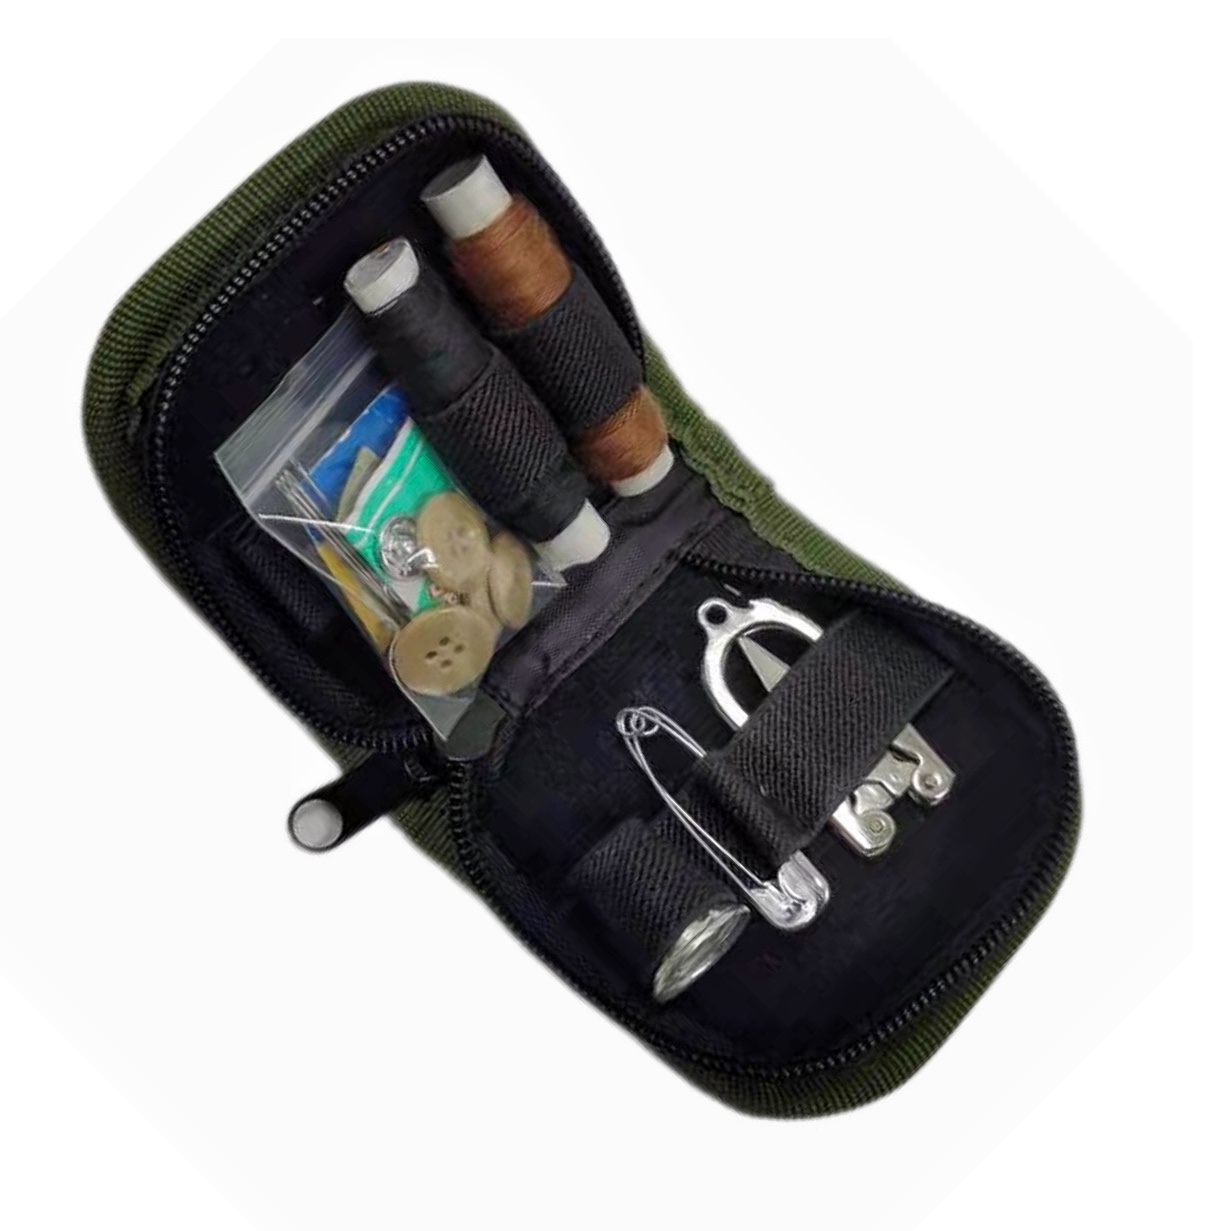 Black Stealth - Tactical Survival Sewing Kit